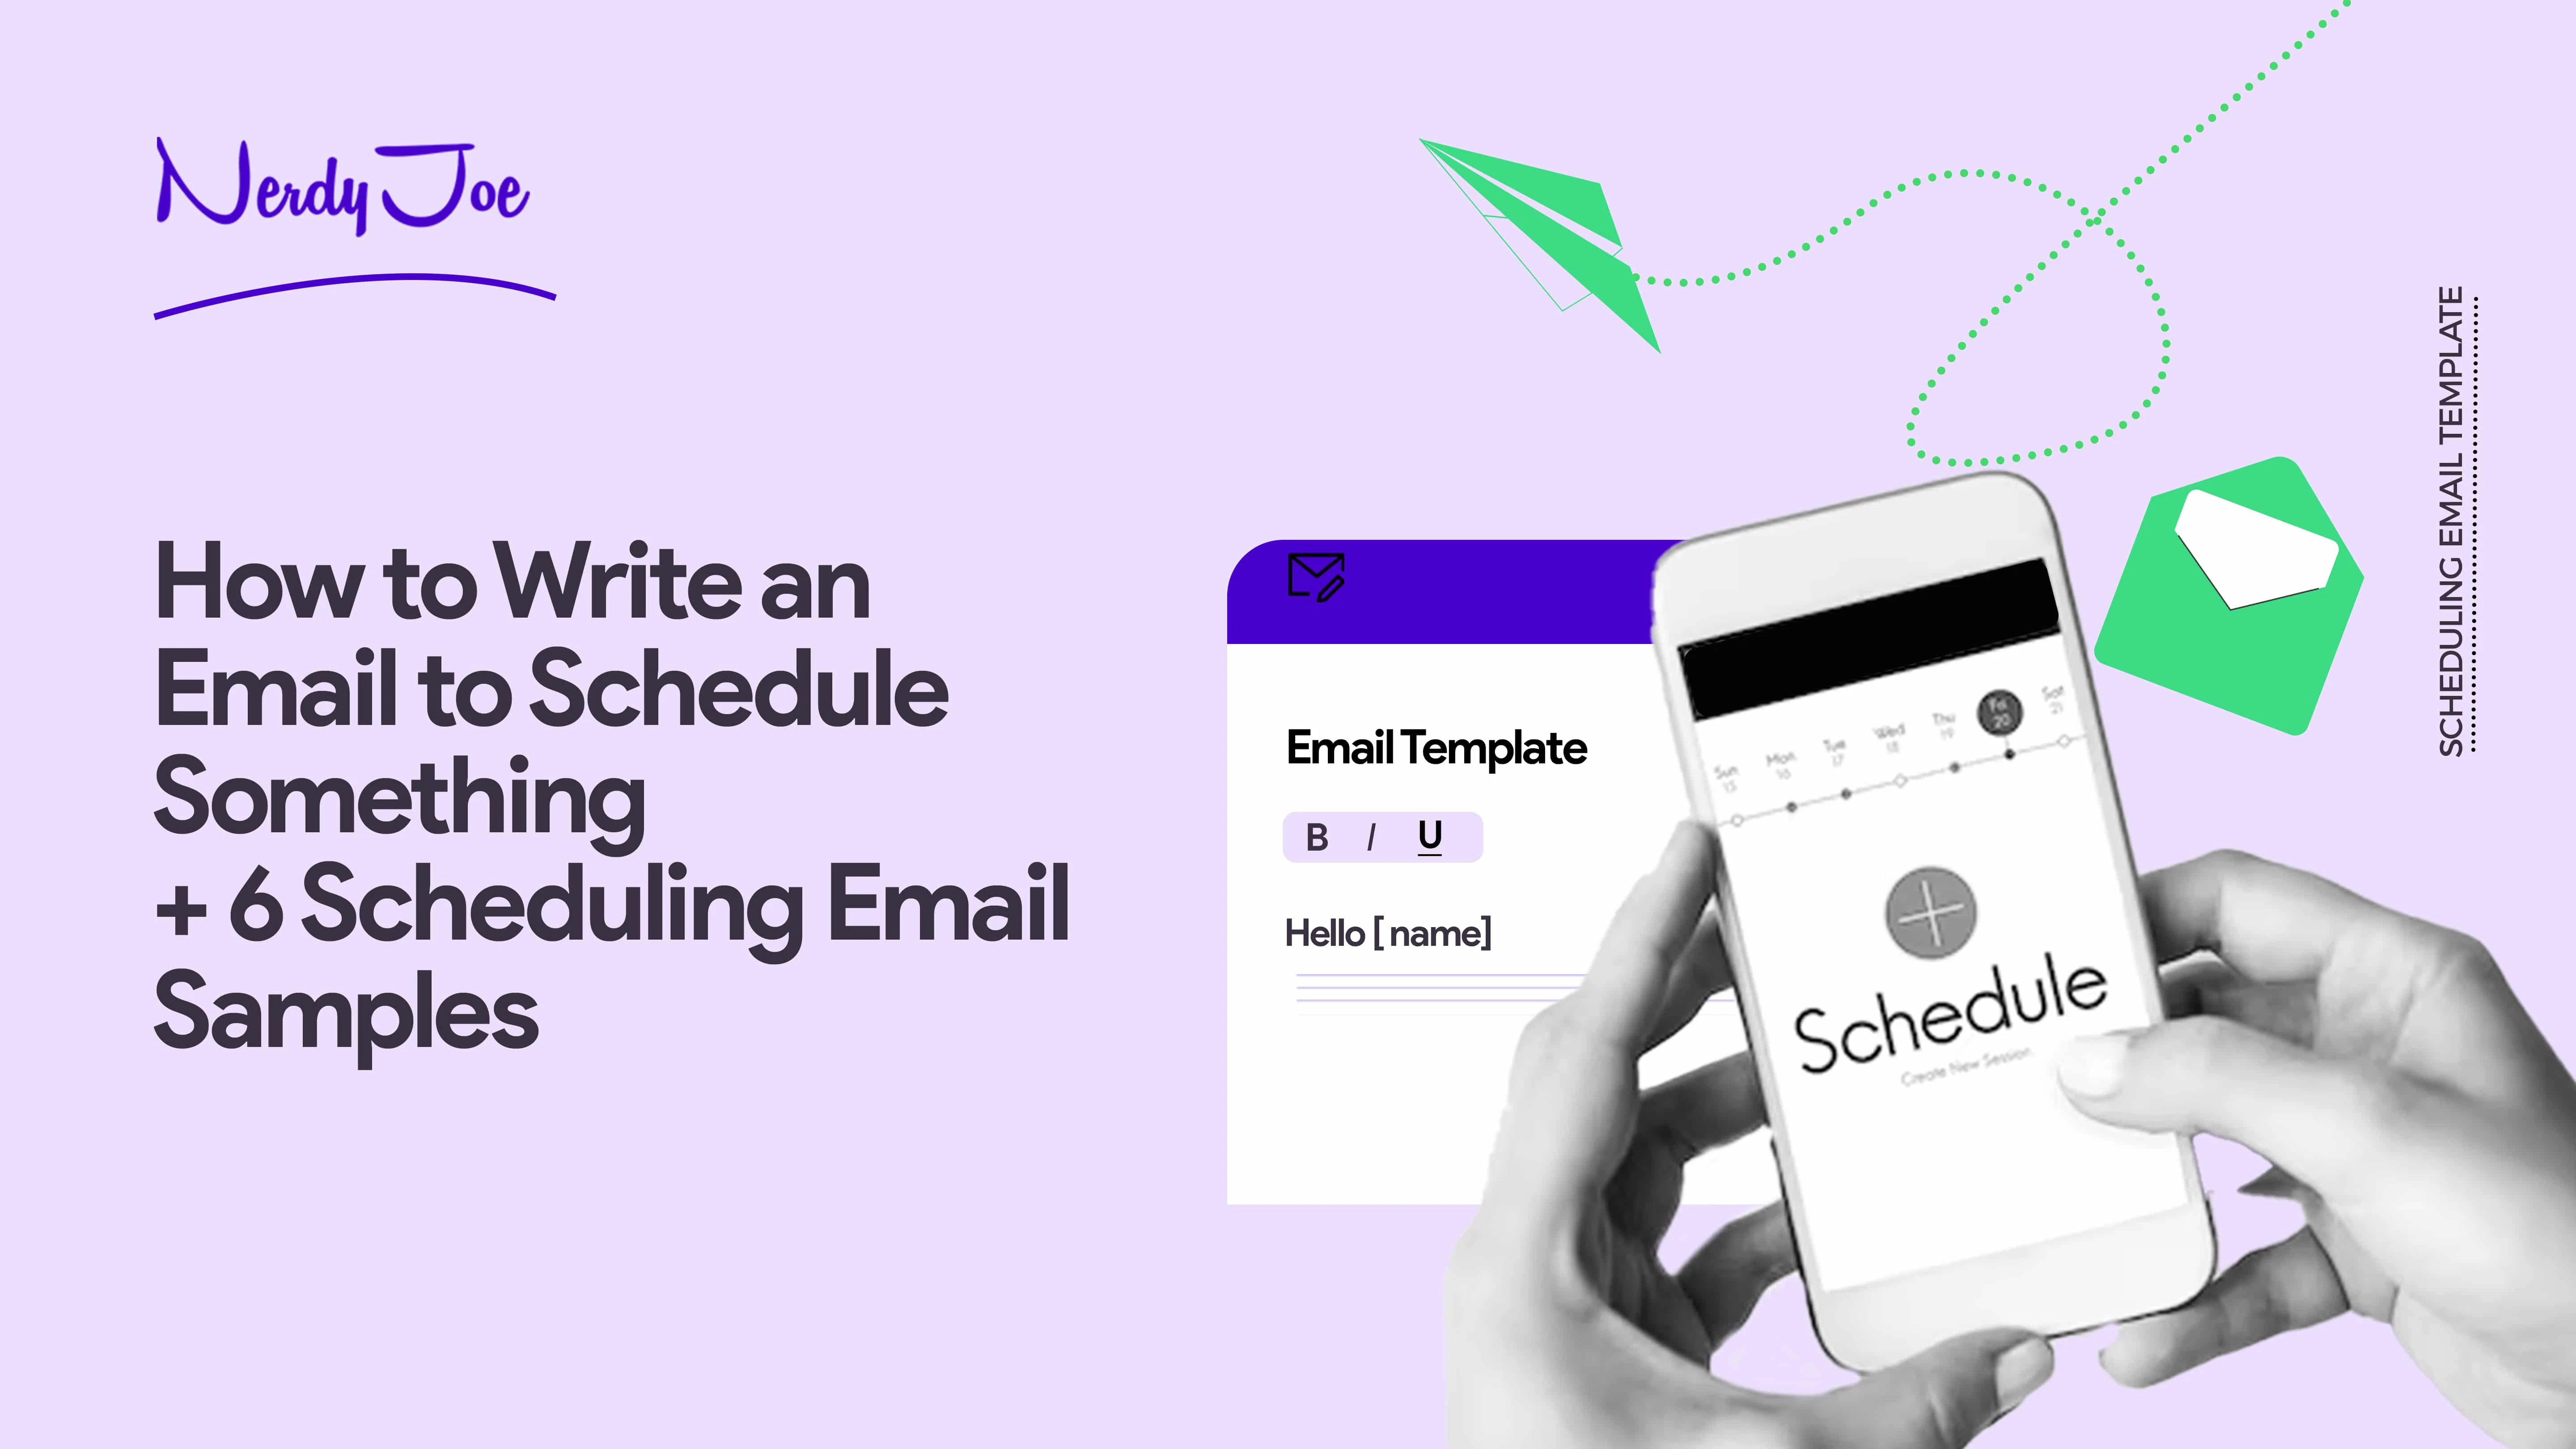 How to Write an Email to Schedule Something With 6 Samples